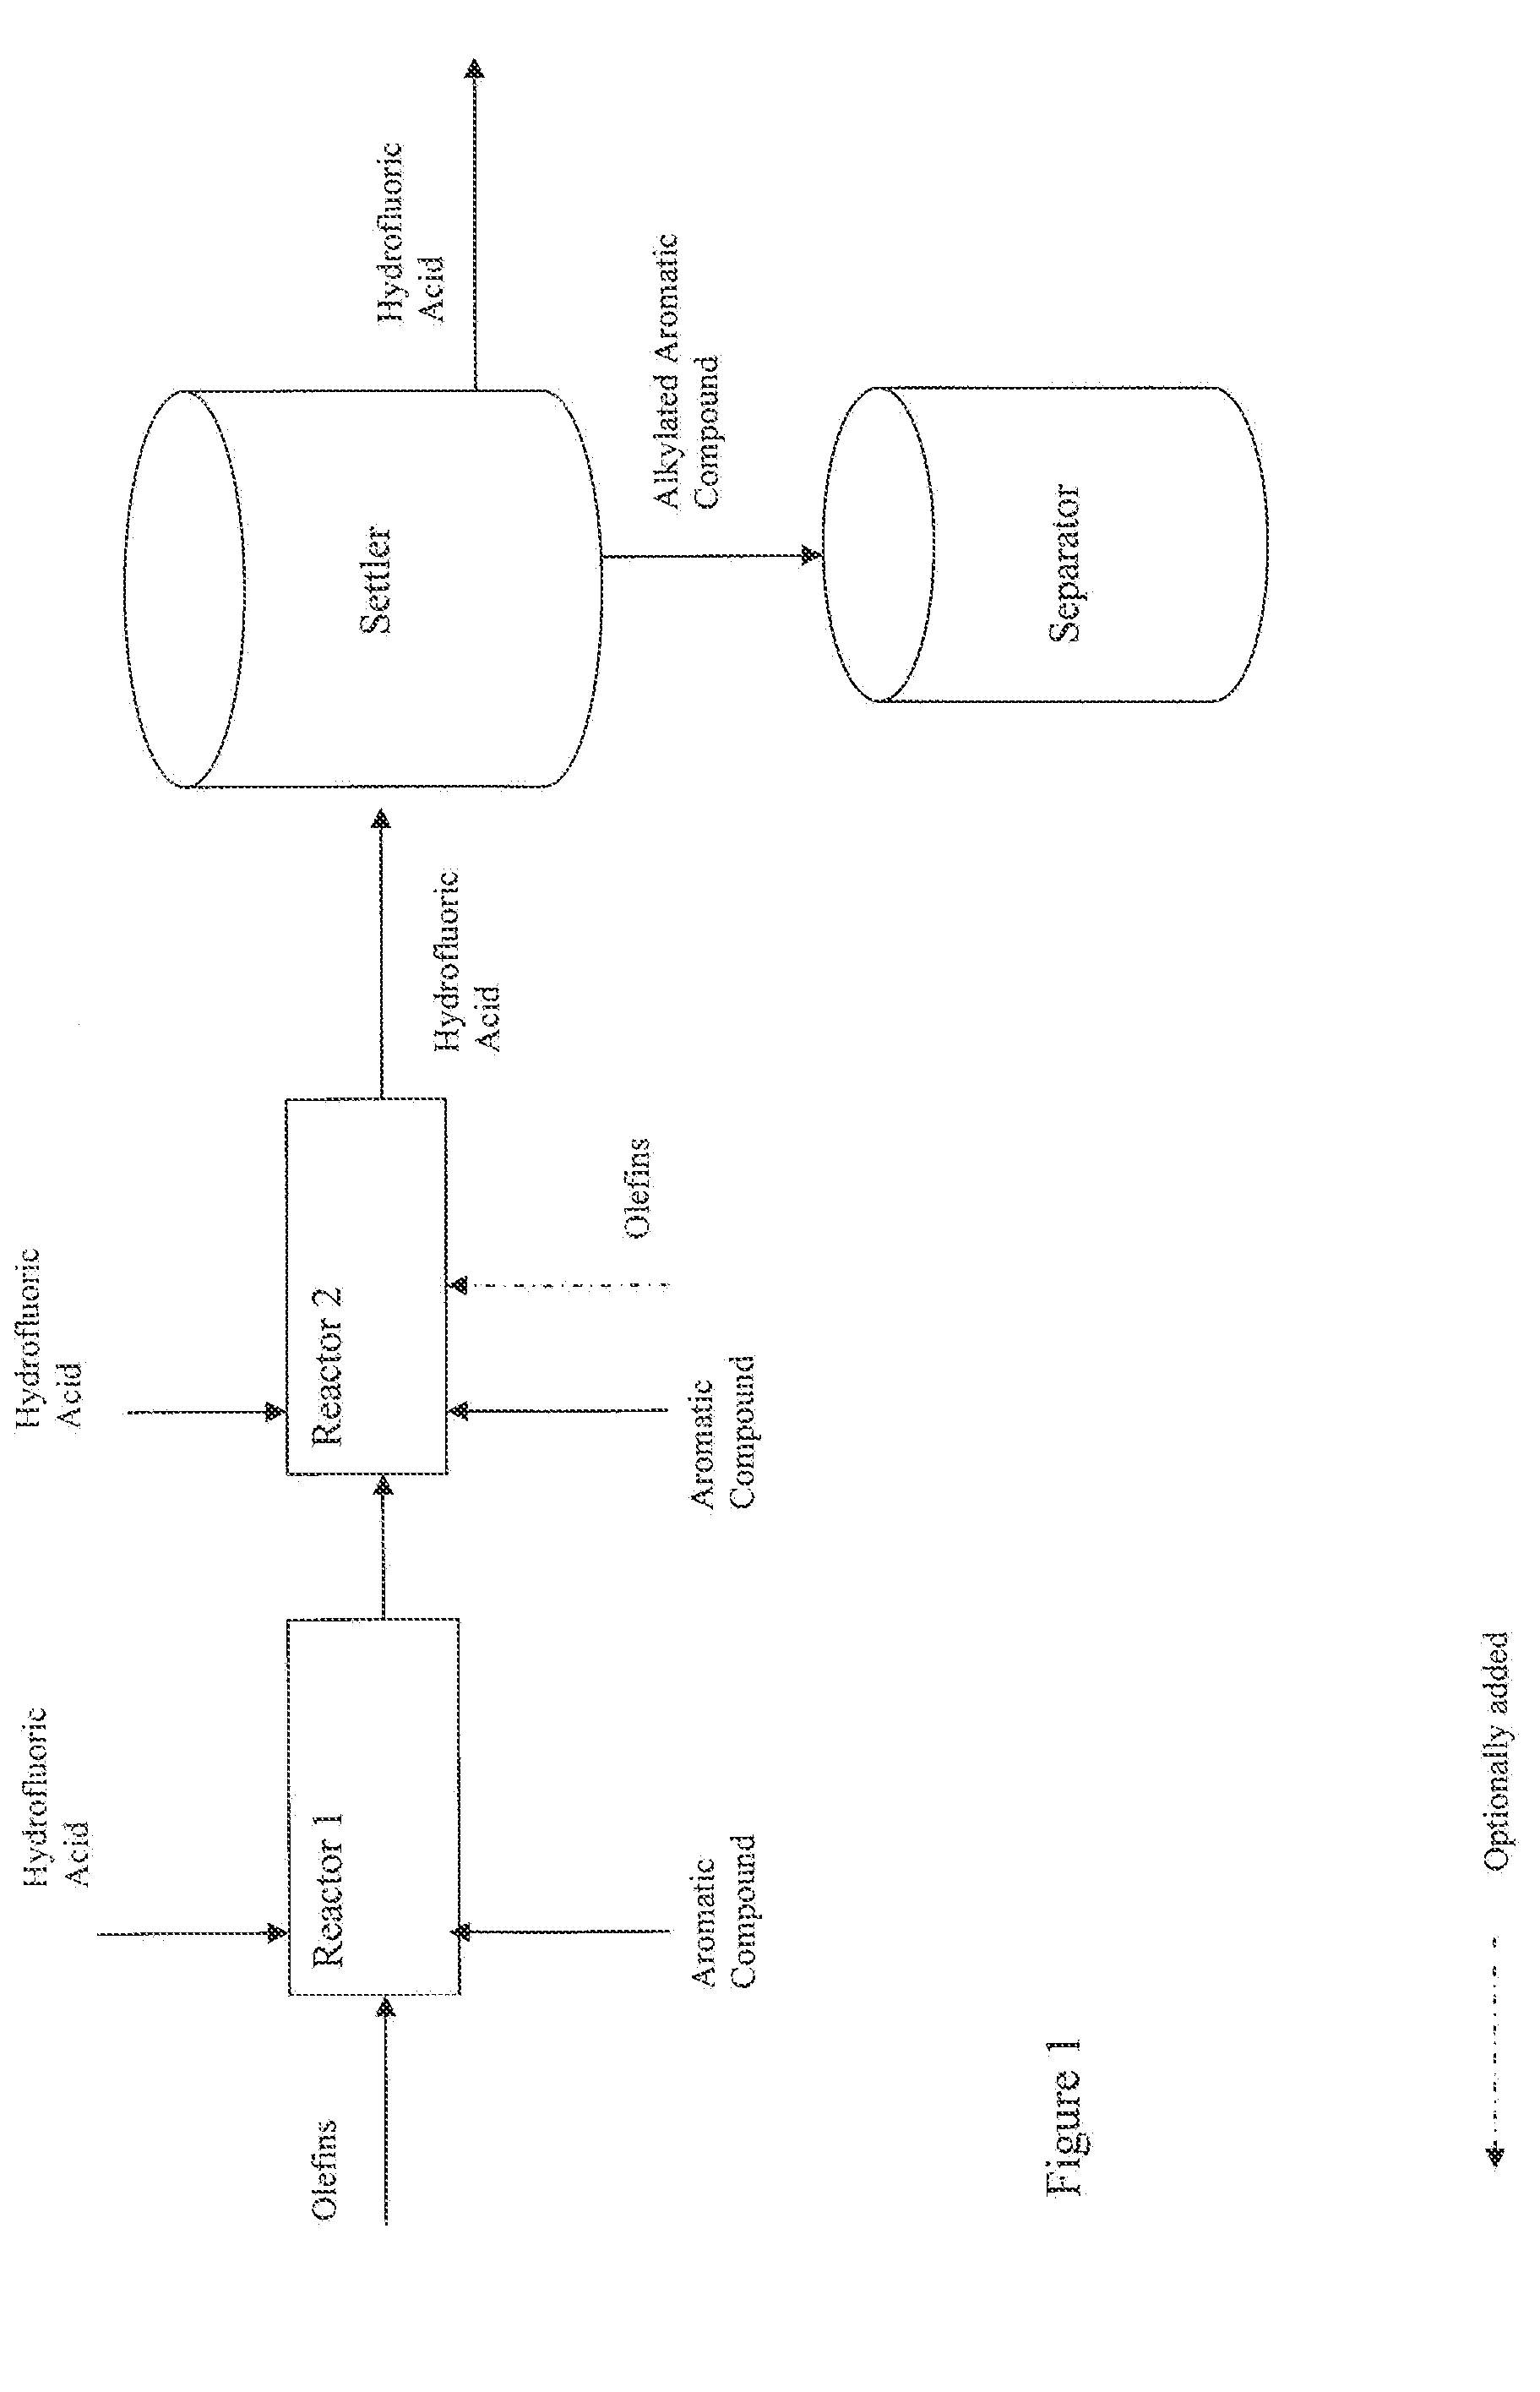 Method of making a synthetic alkylaryl sulfonate